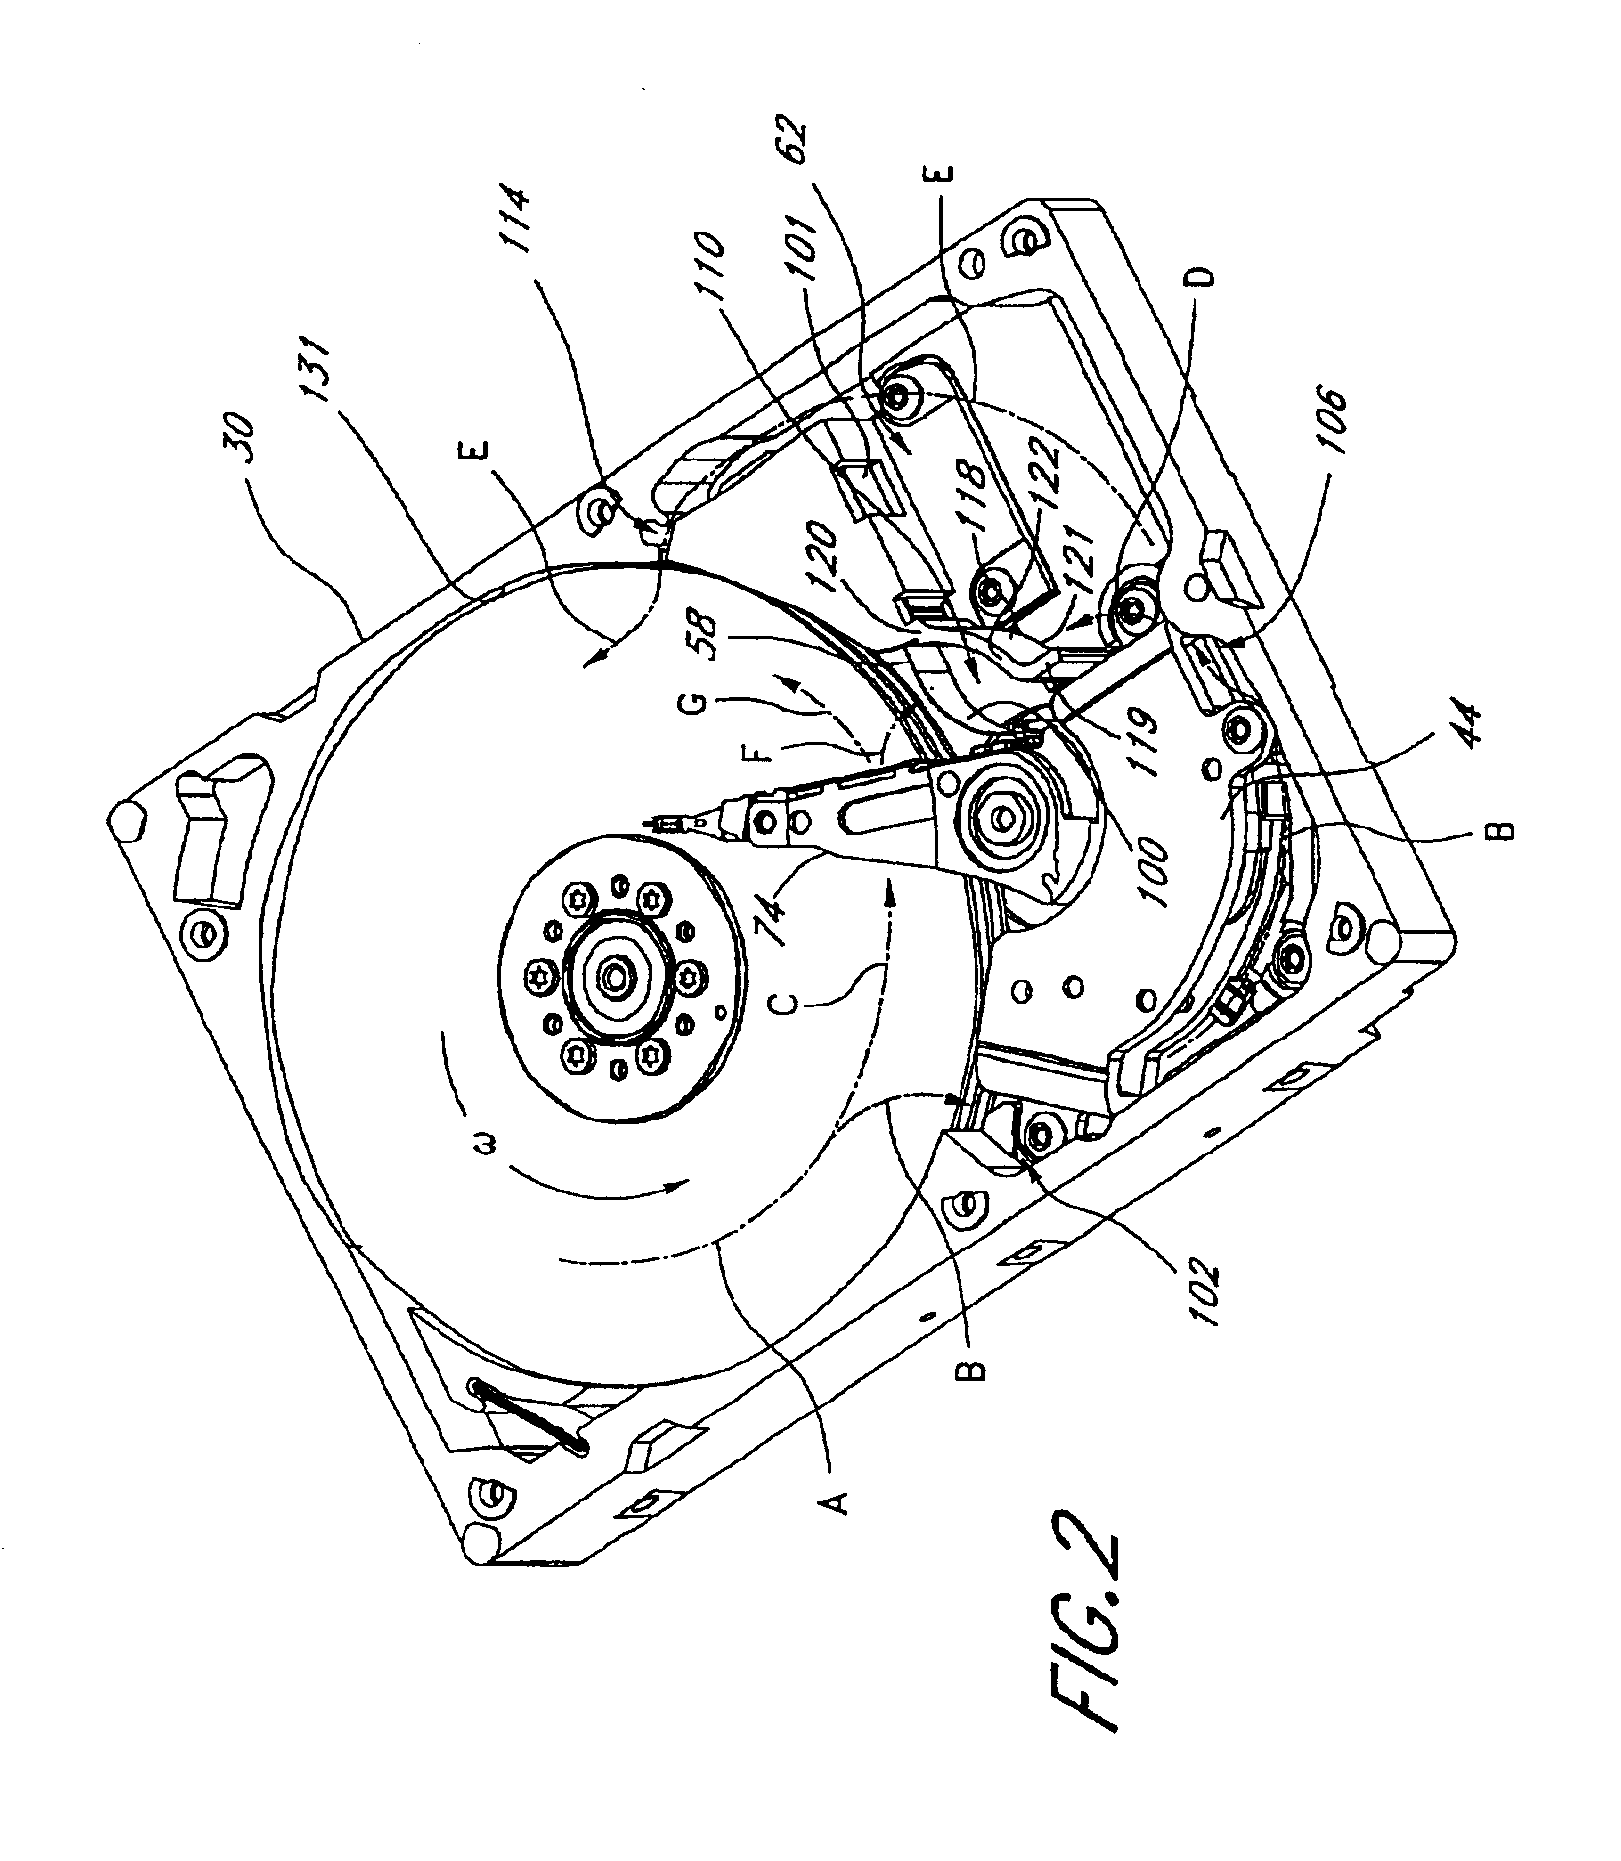 Disk drive having a shroud assembly for shielding at least one of a flex cable and an actuator arm